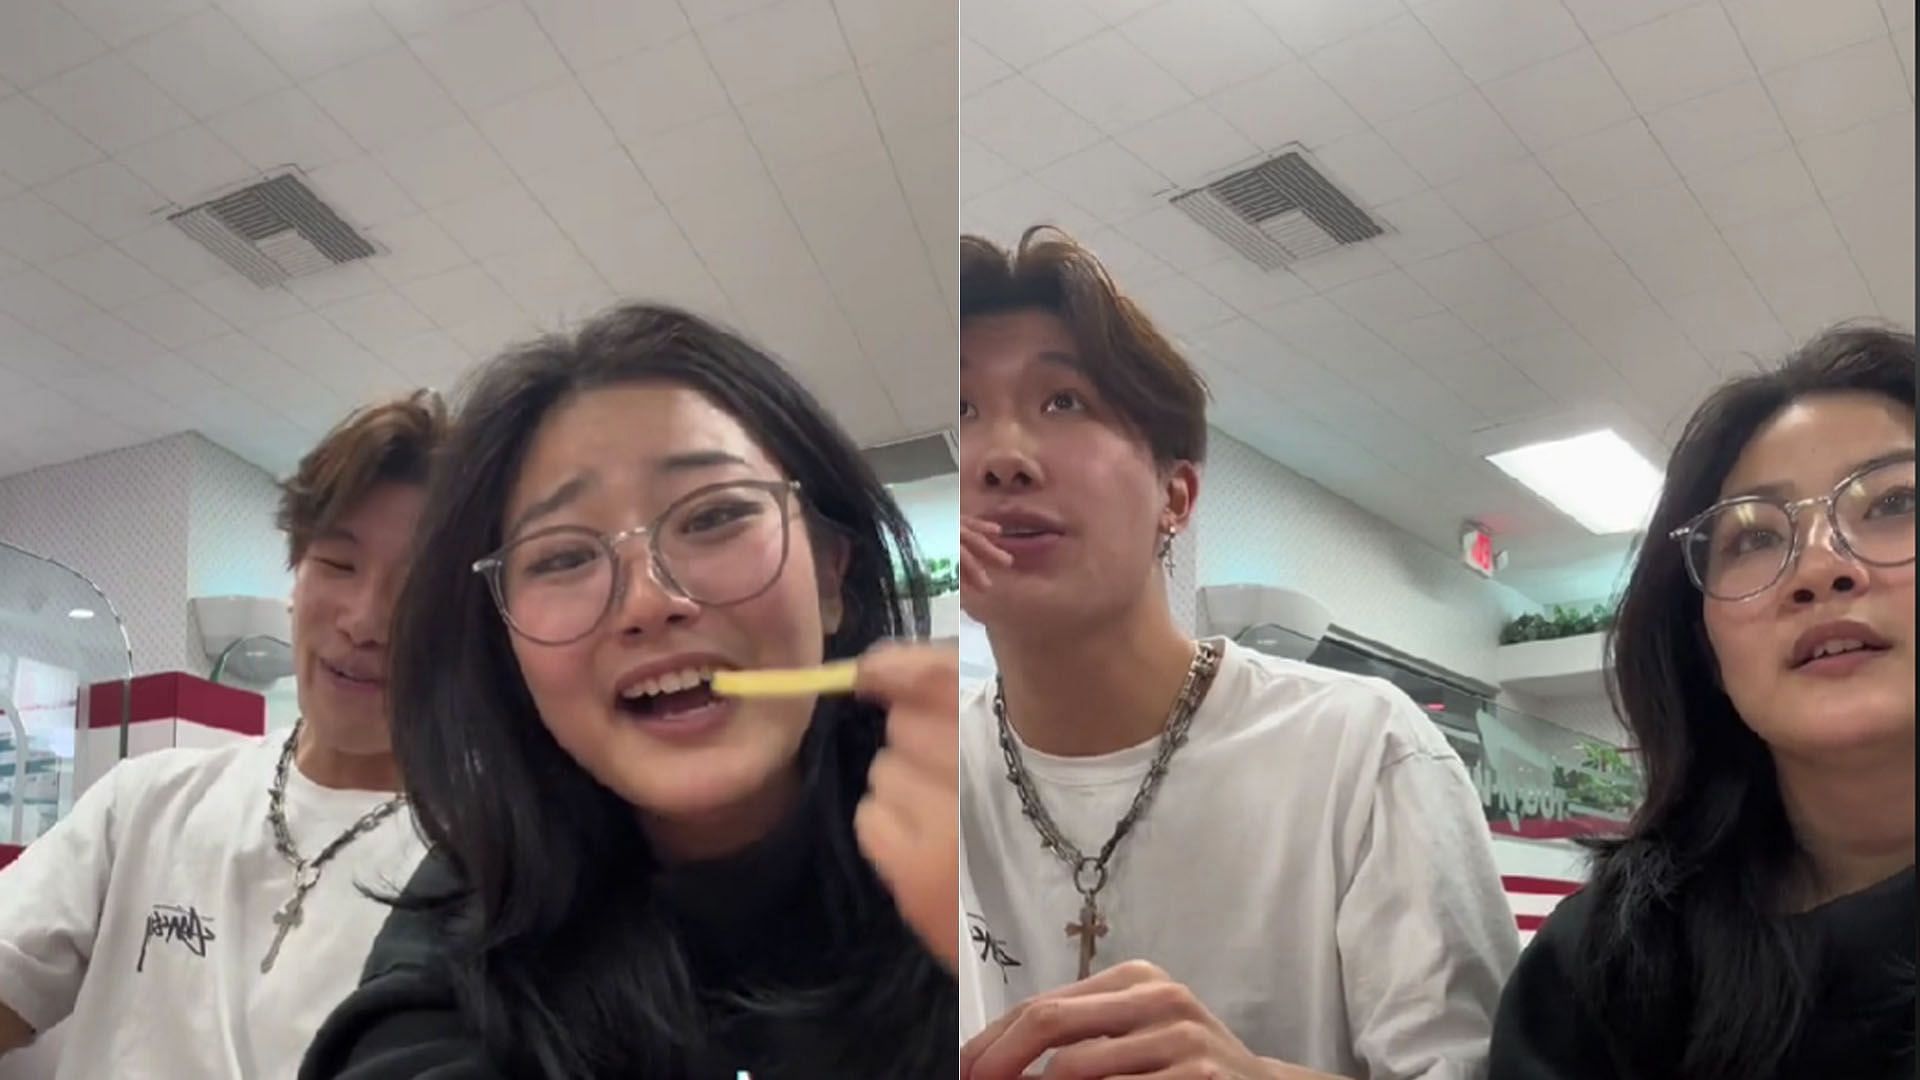 Two students of Asian descent face homophobic and racial rant at a California In N Out (Image via TikTok/@arinekim)